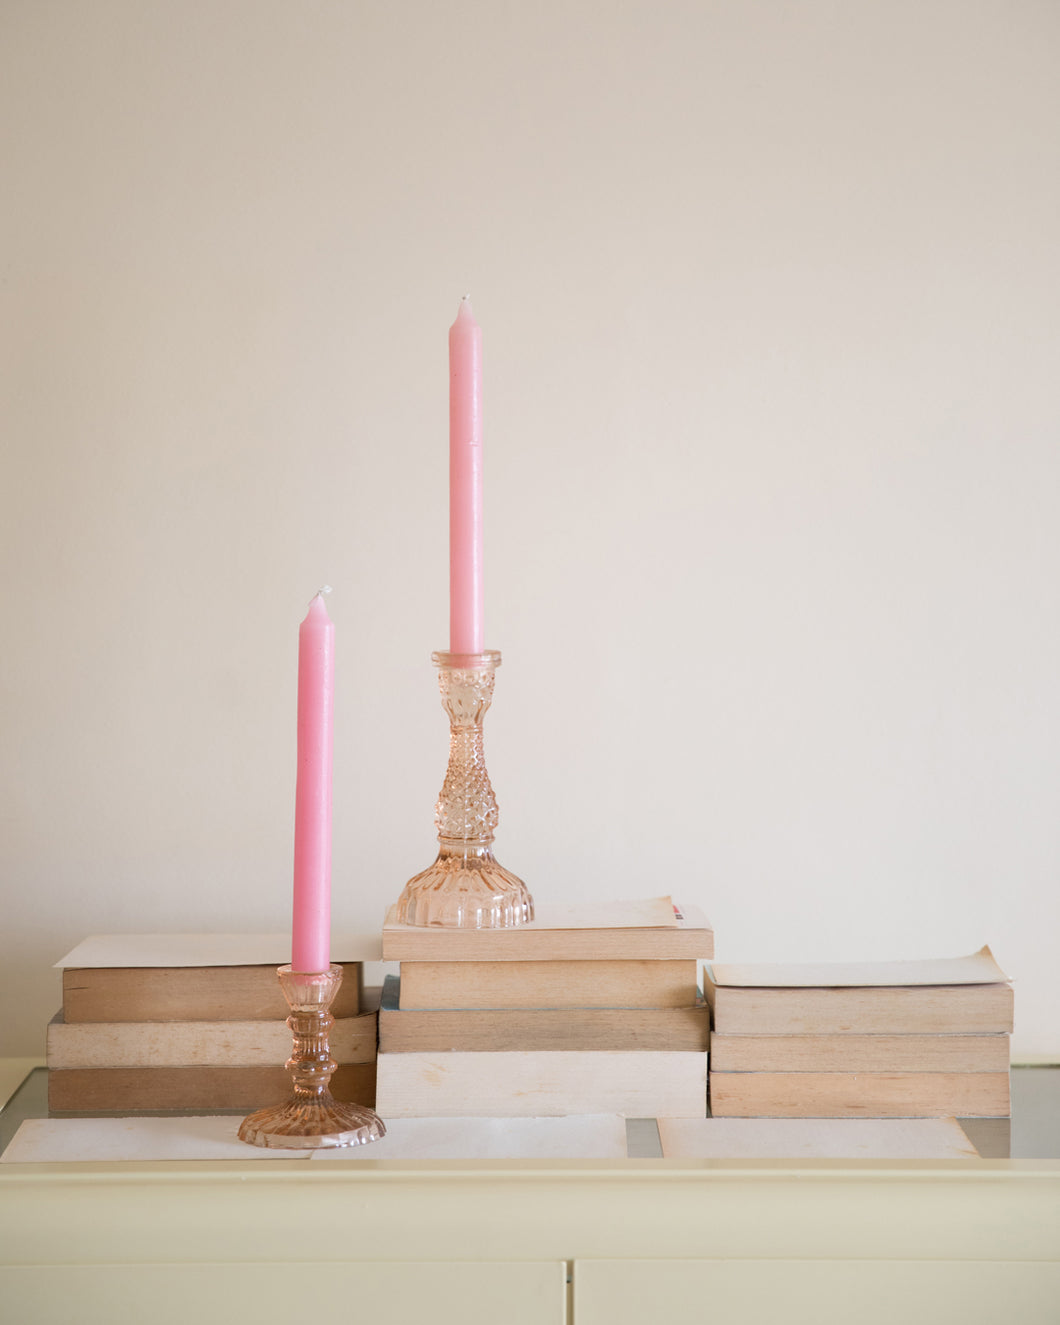 Coral Sky Candle Stand Set